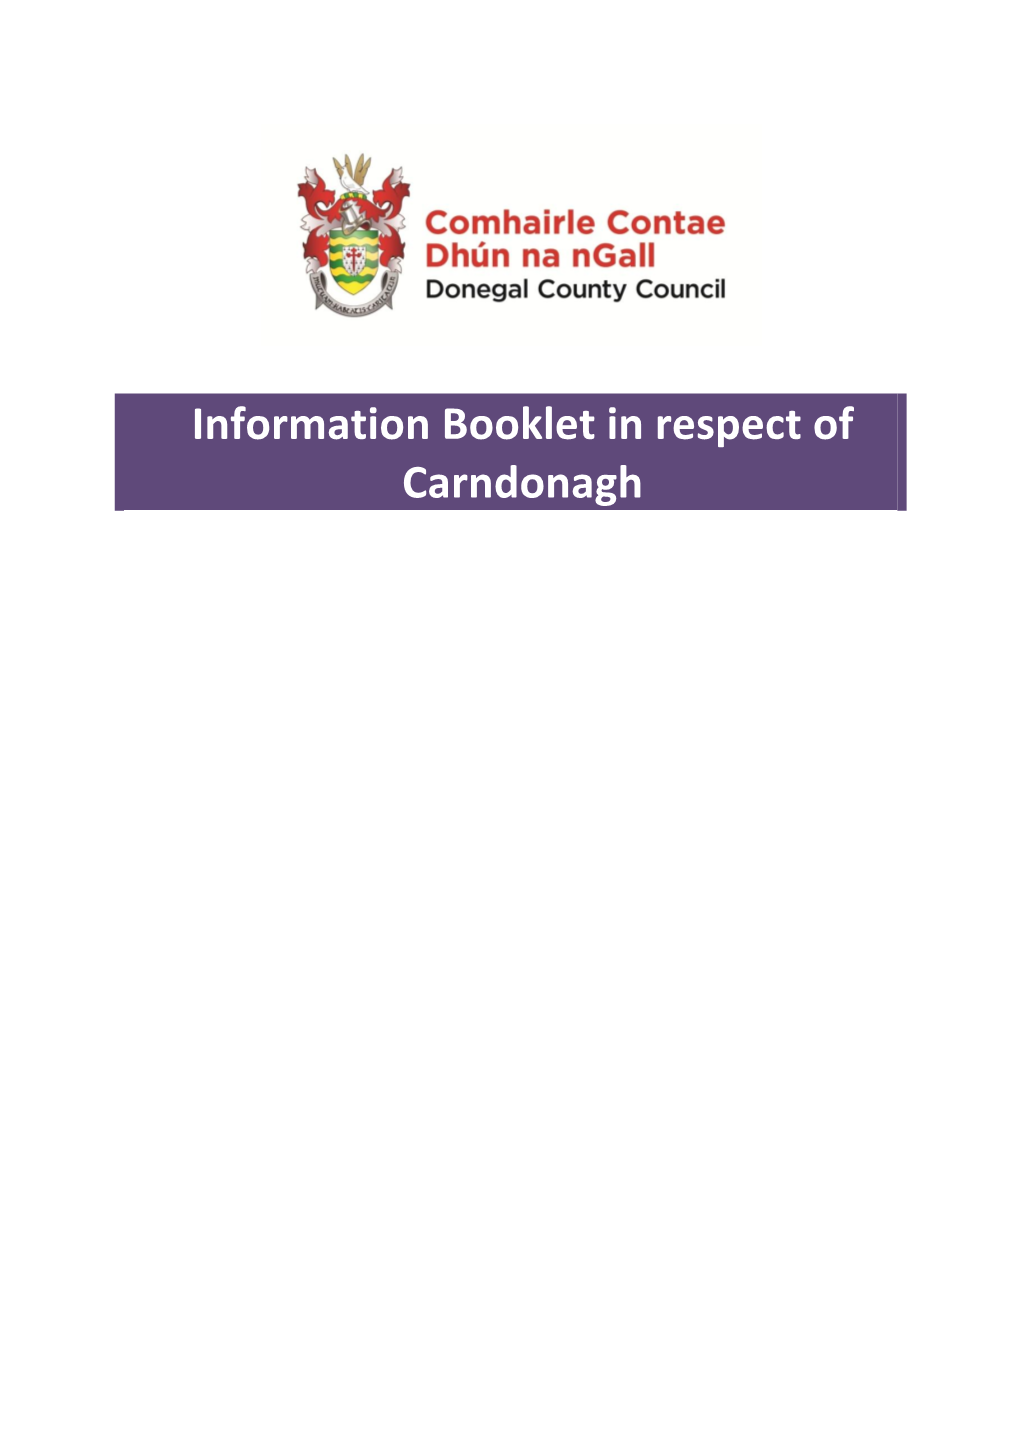 Information Booklet in Respect of Carndonagh